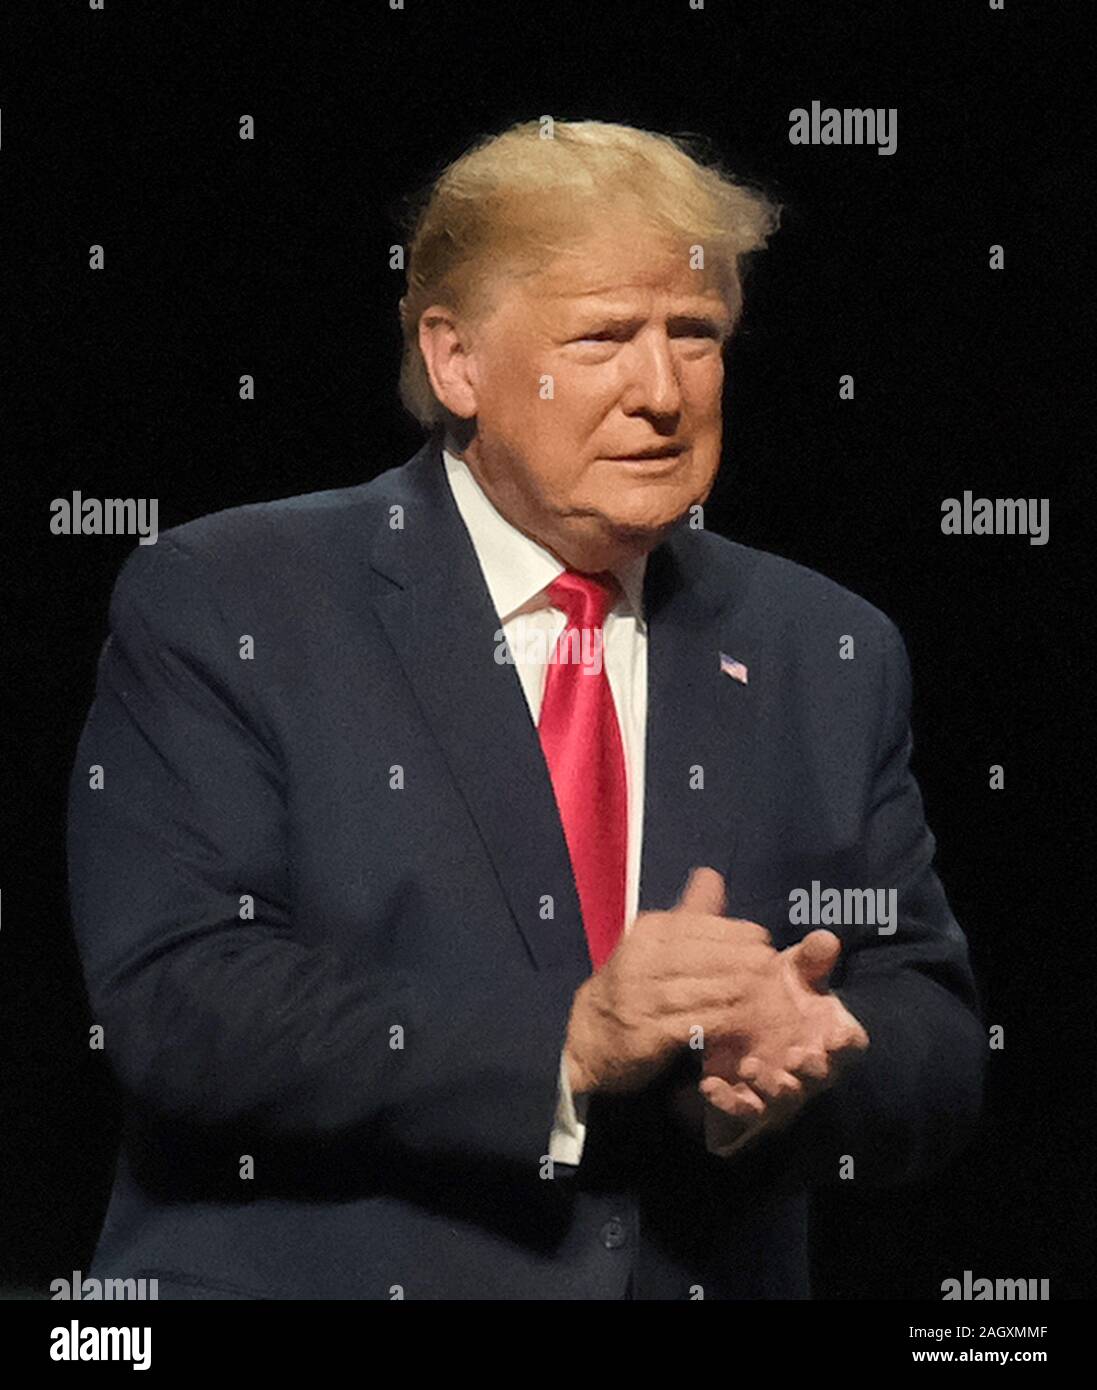 West Palm Beach, USA. 22nd Dec, 2019. USA President Donald J.Trump speaks at the Turning Point USA conference for young conservatives at the Palm Beach Convention Center in West Palm Beach, Florida on Saturday, December 21, 2019. On Wednesday, December 18, 2019, President Donald Trump was the third U.S. President to be impeached by the House of Representatives. Photo by Gary I Rothstein/UPI Credit: UPI/Alamy Live News Stock Photo